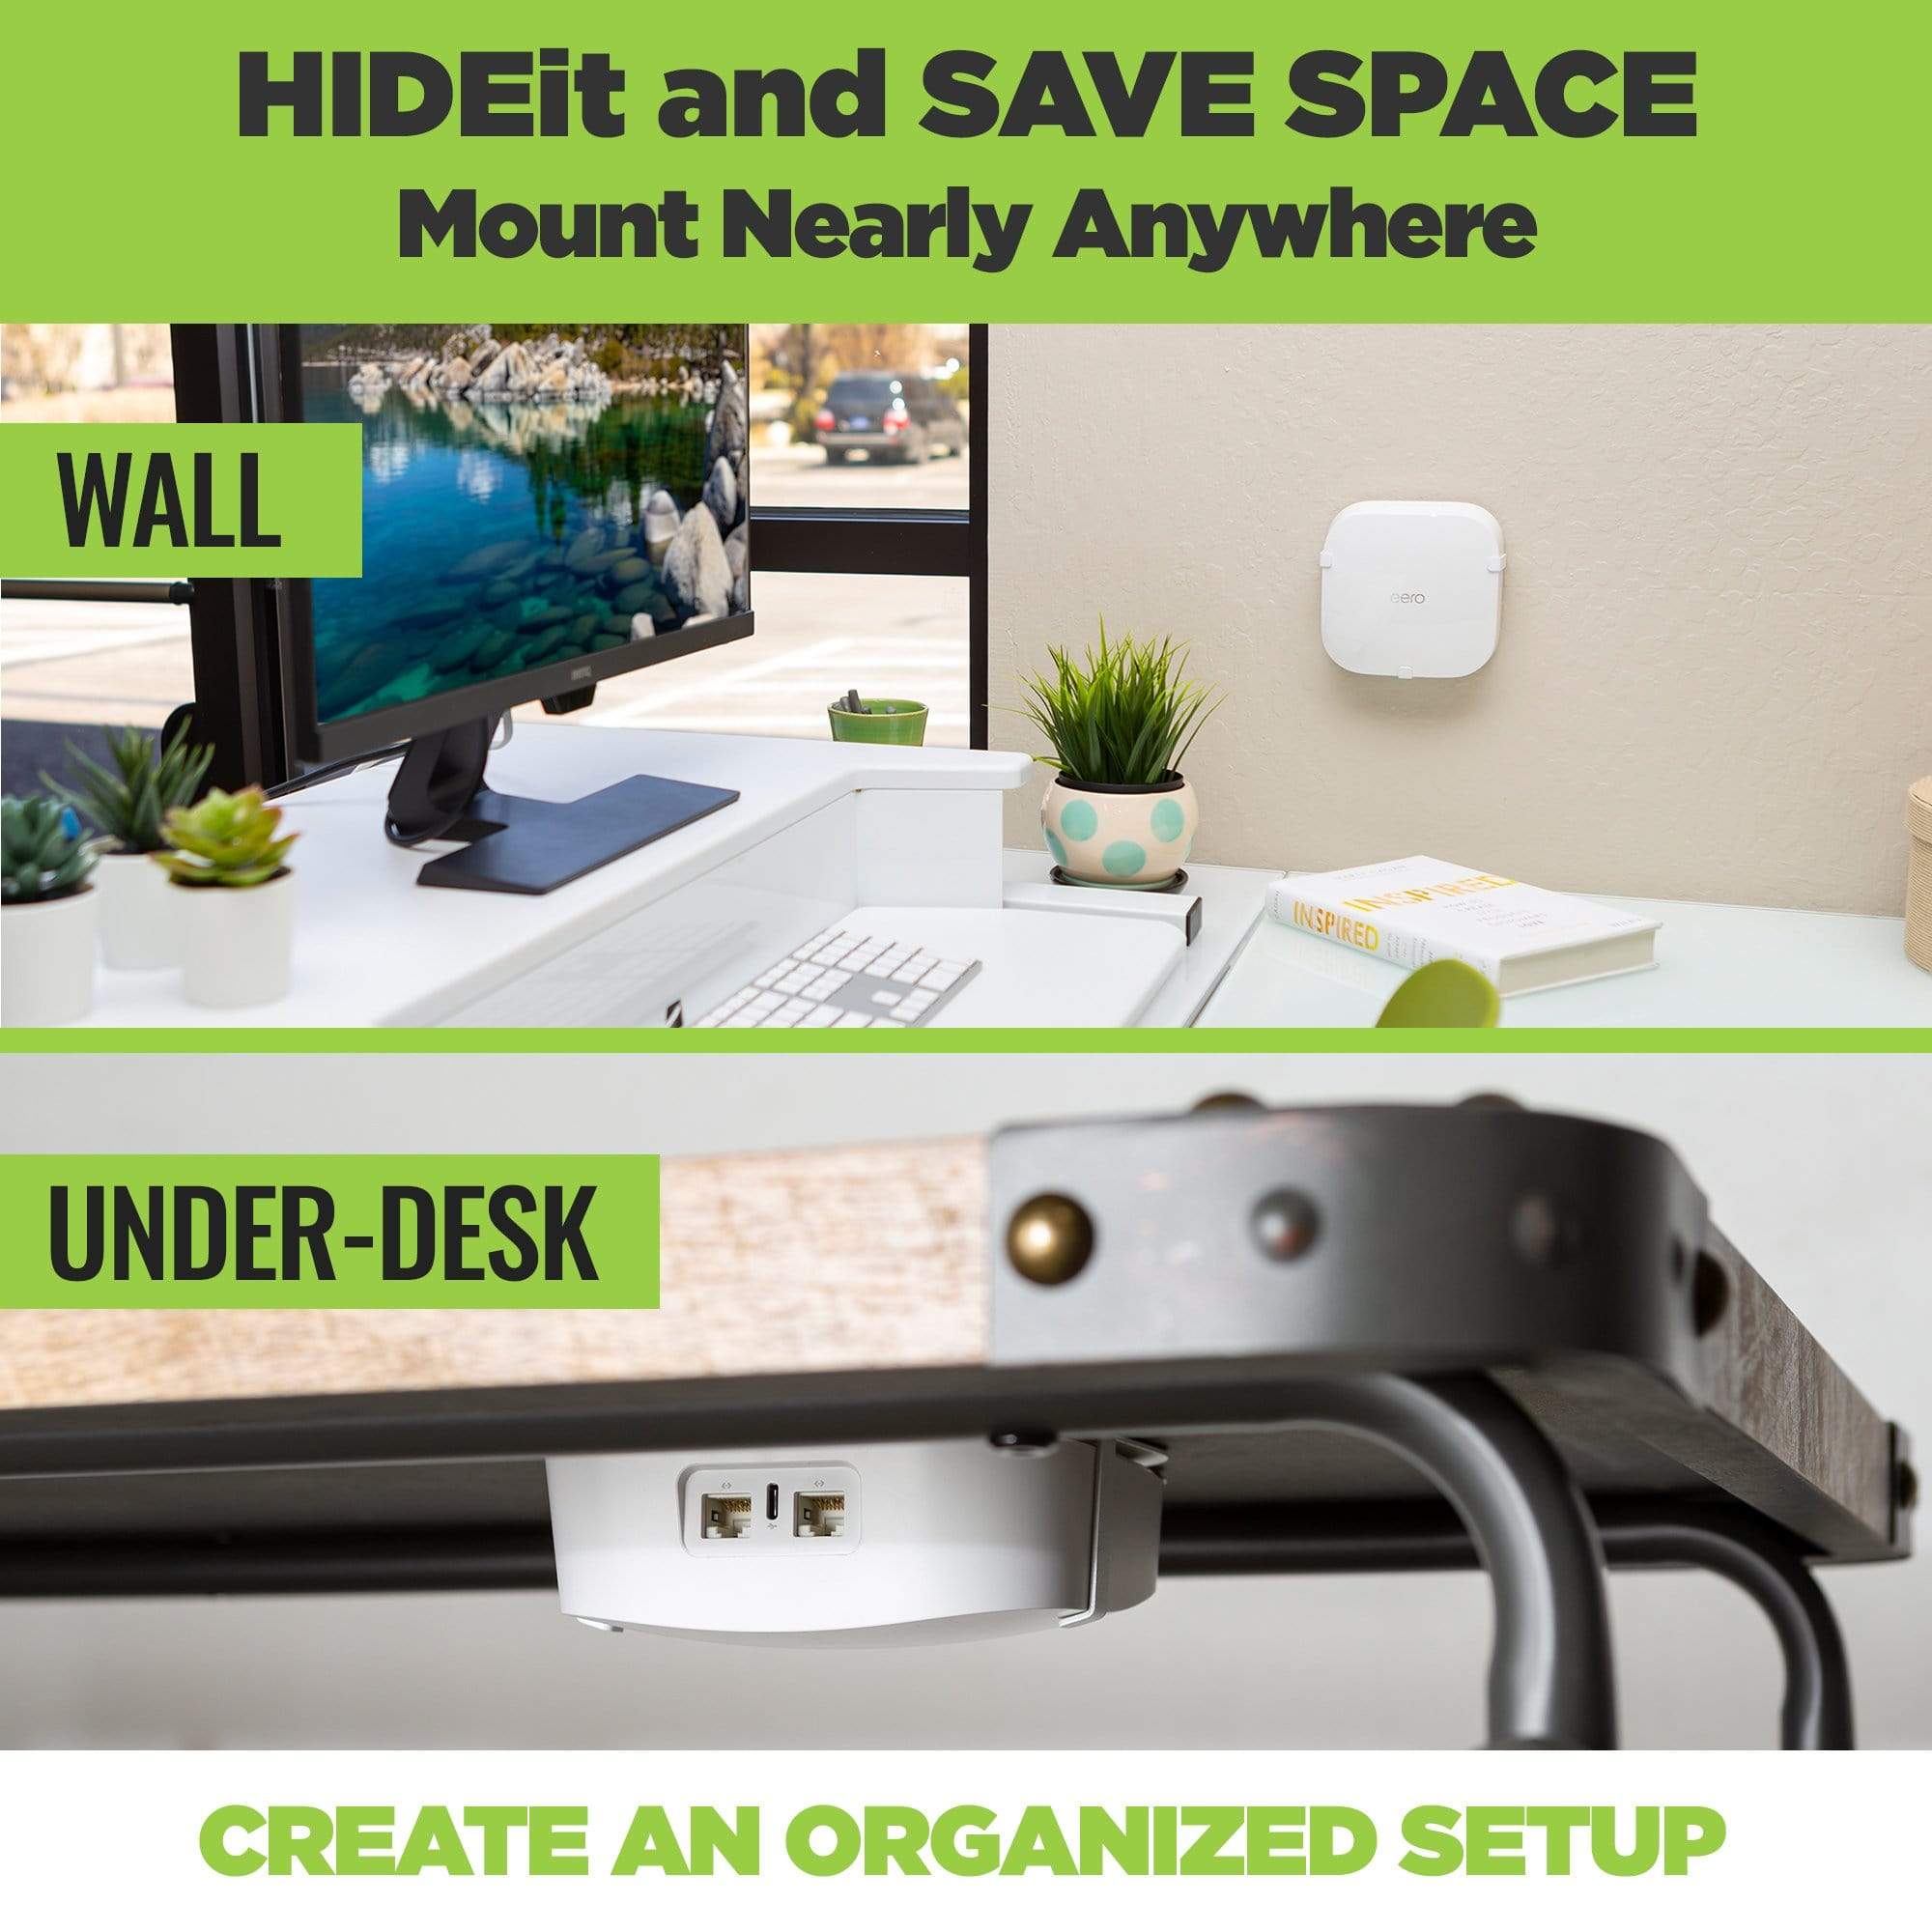 The HIDEit Eero Pro 6 Mount can be wall mounted or under-desk mounted to create an organized setup.